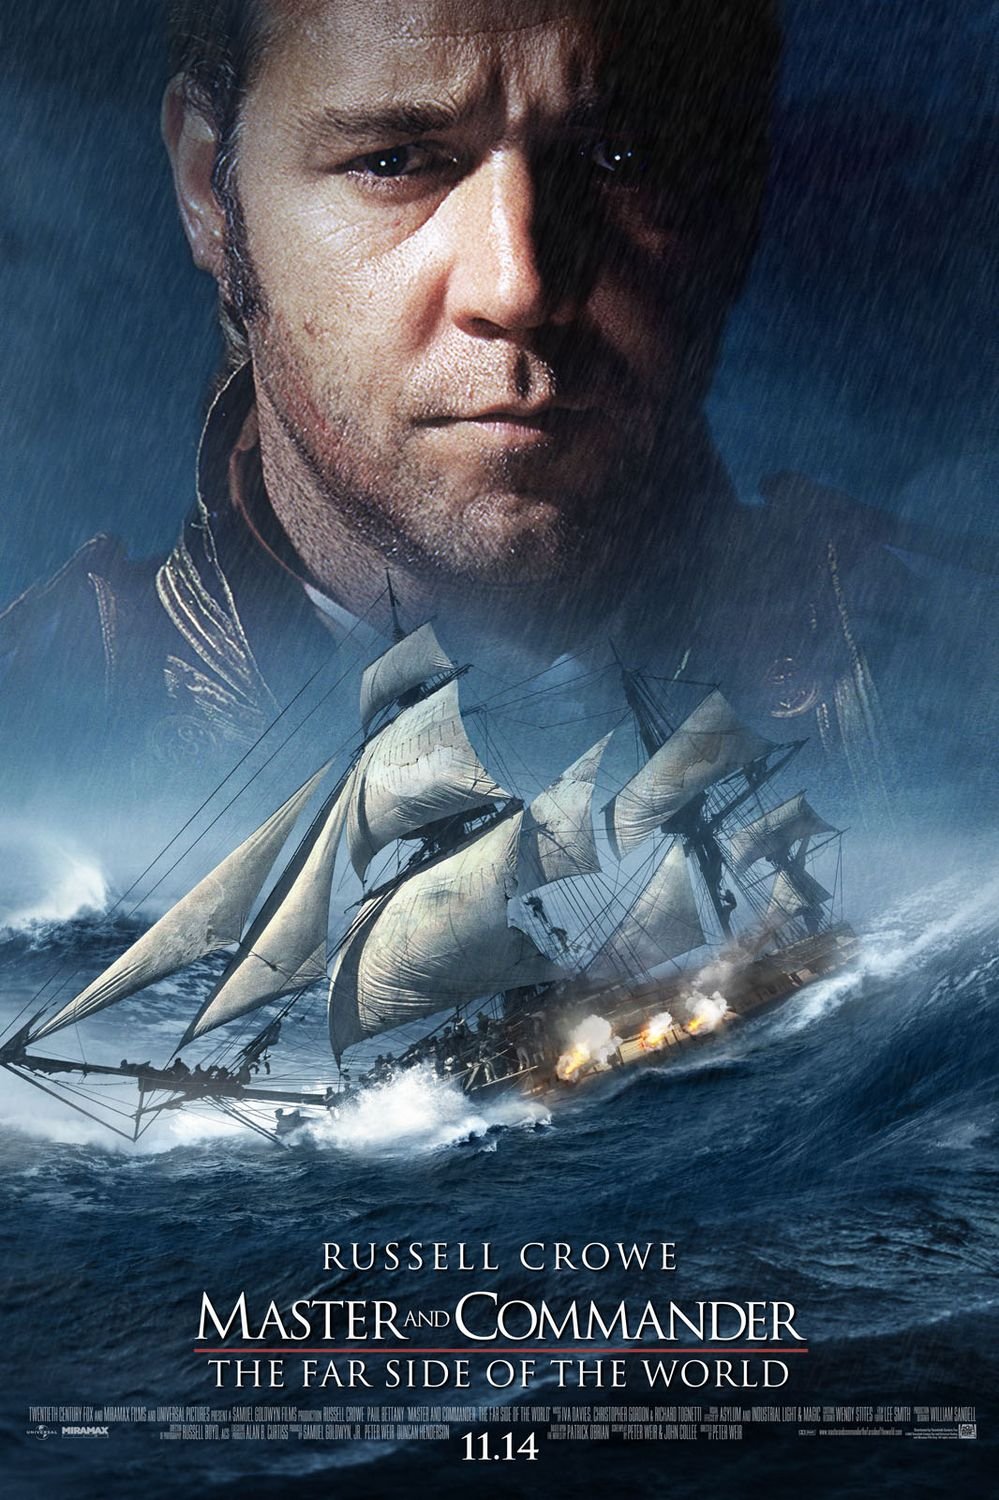 Poster of the movie Master and Commander: The Far Side of the World